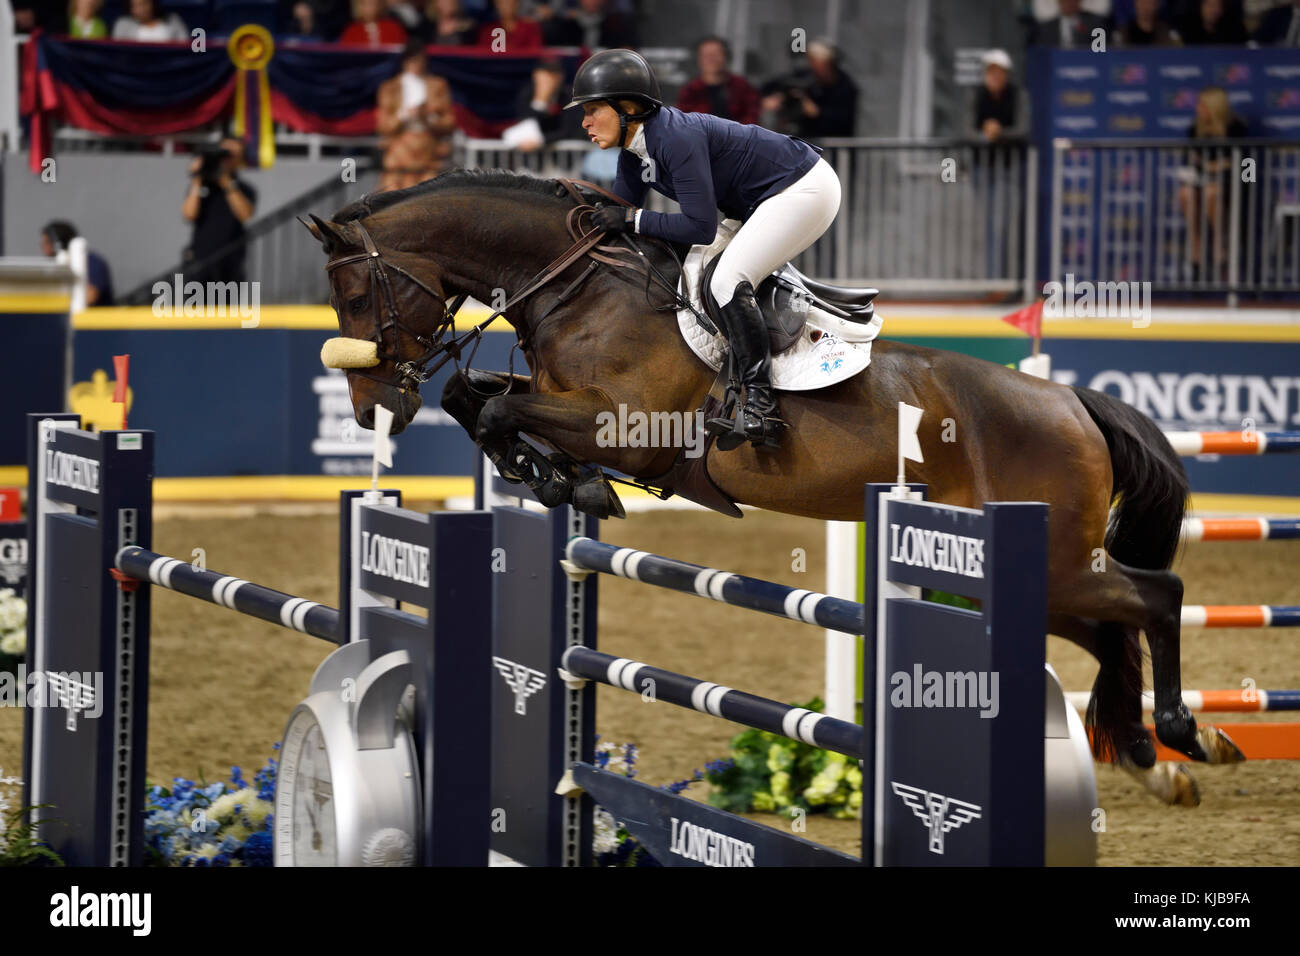 Elizabeth Madden USA riding Breitling LS in the Longines FEI World Cup Show Jumping competition at the Royal Horse Show Toronto Stock Photo